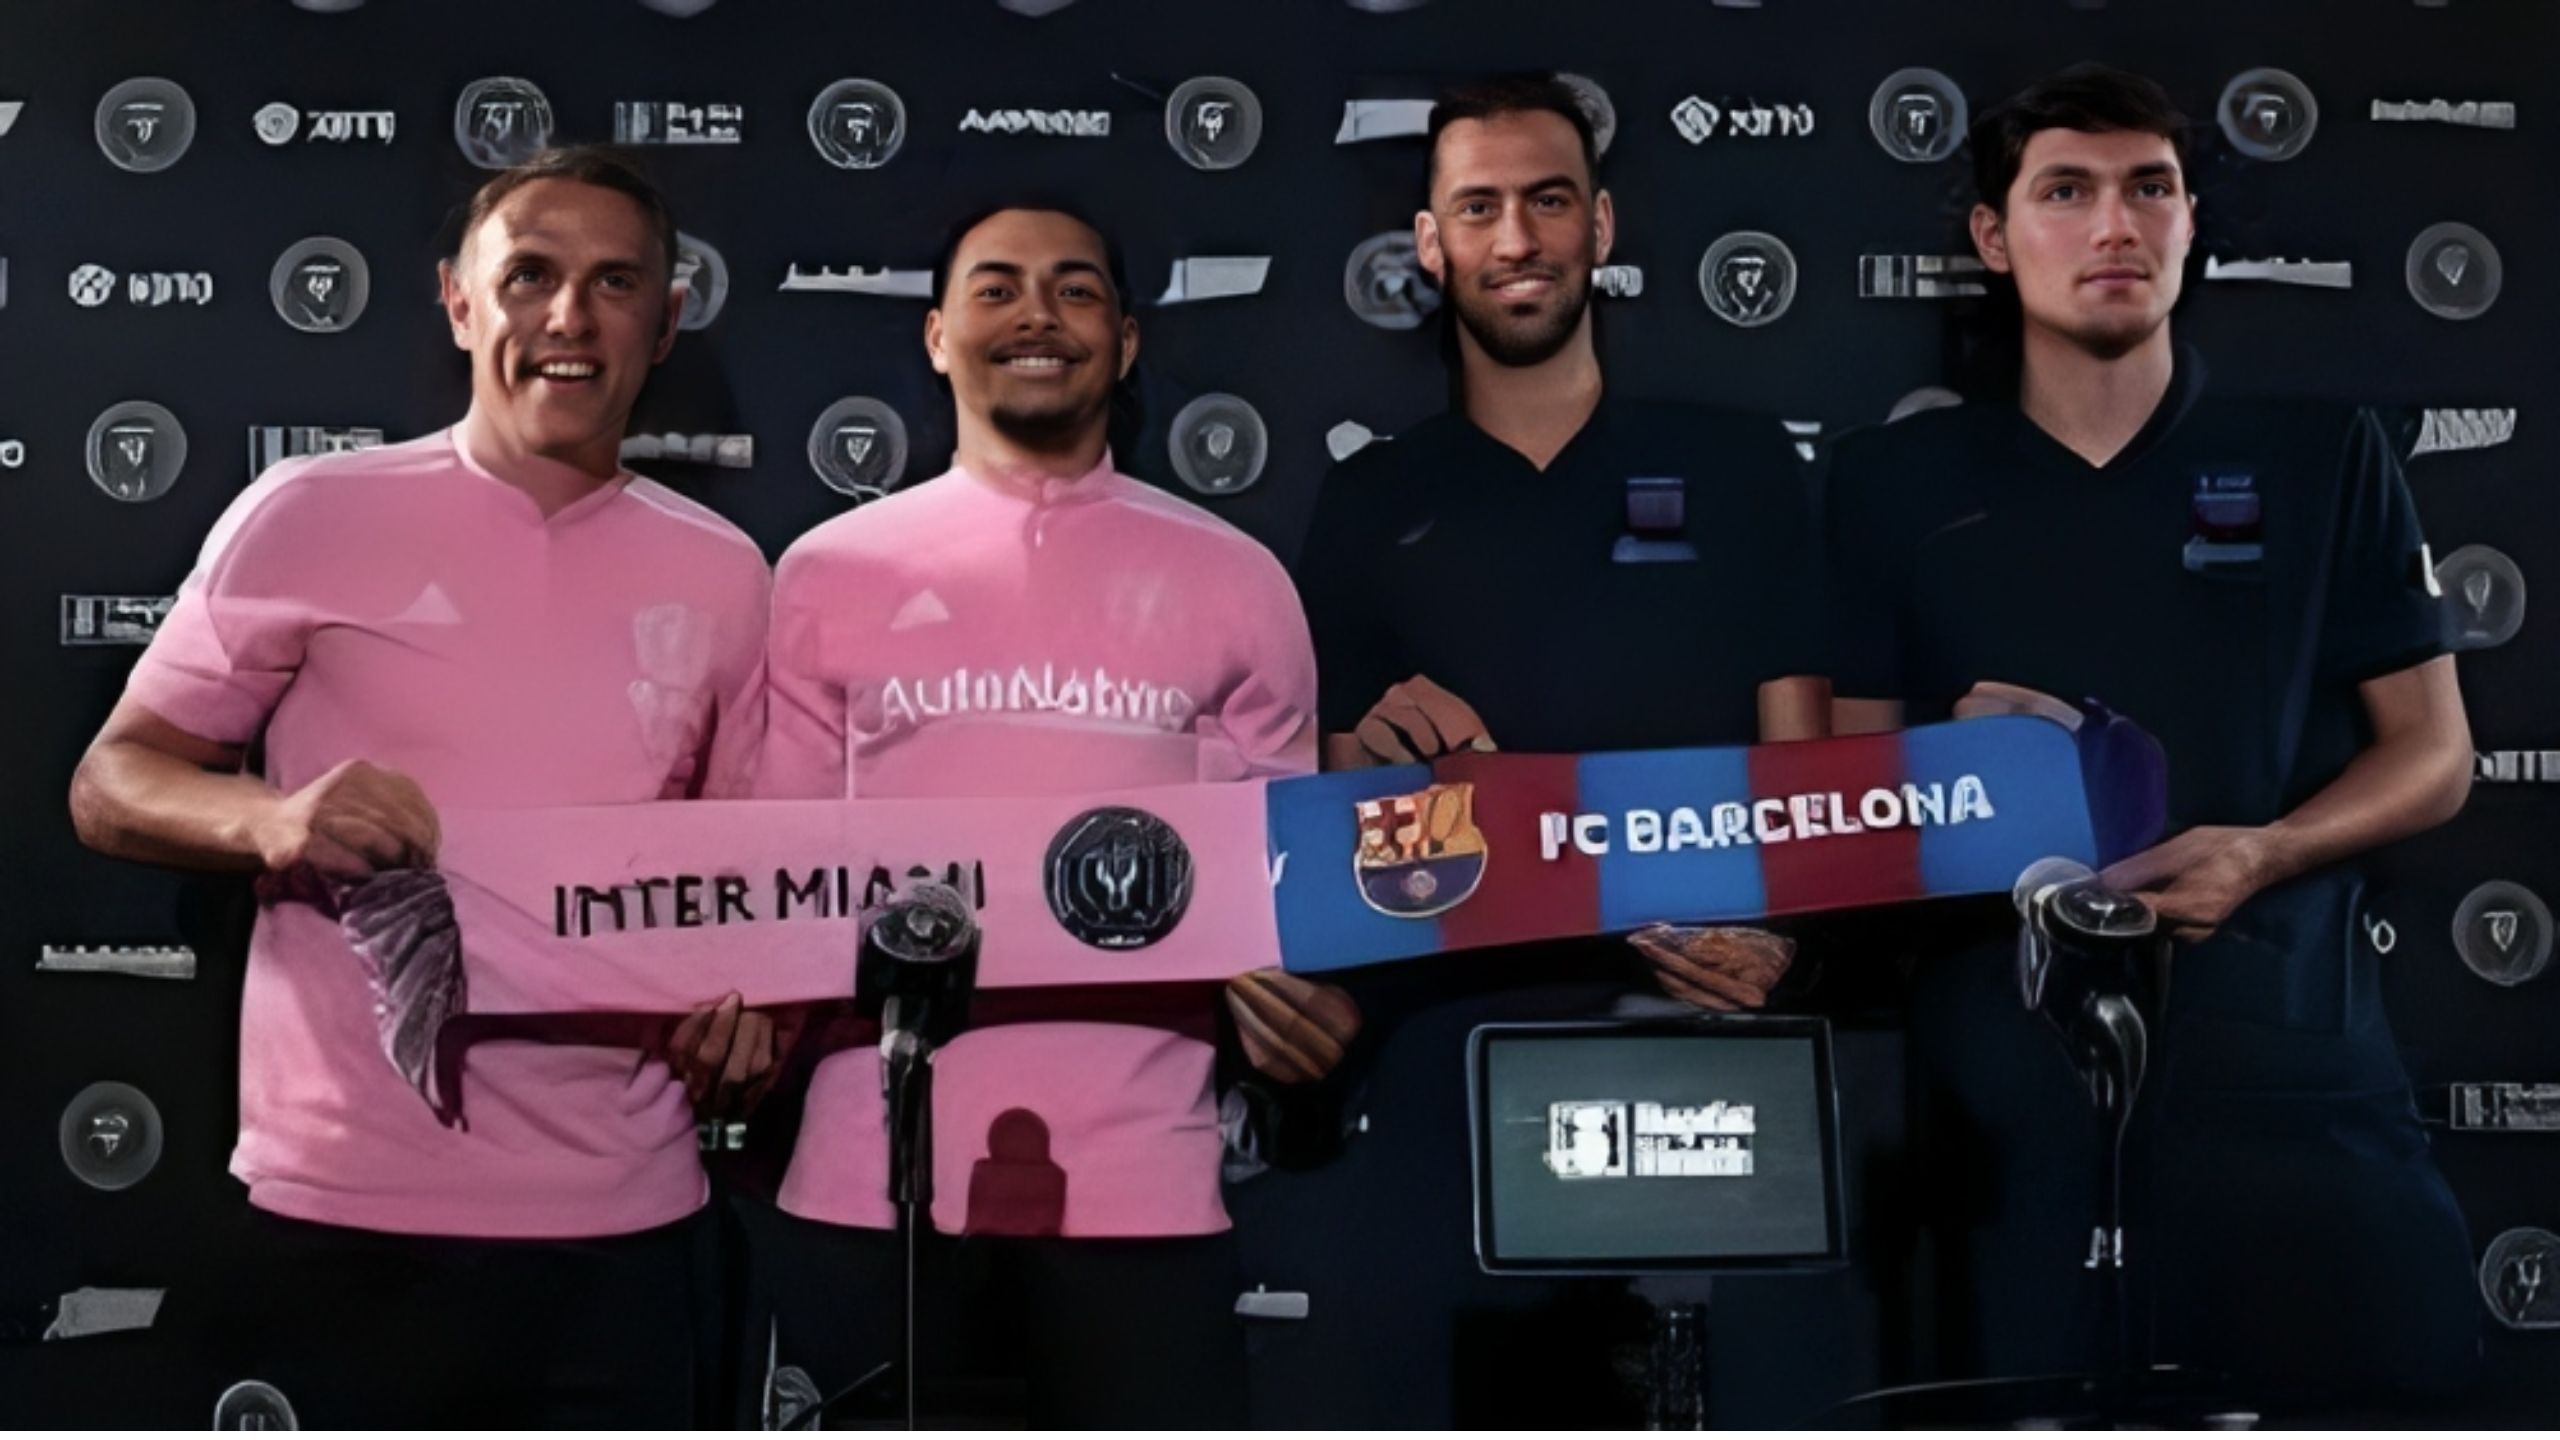 Inter Miami vs Barcelona: A Clash of Cultures on the Soccer Pitch